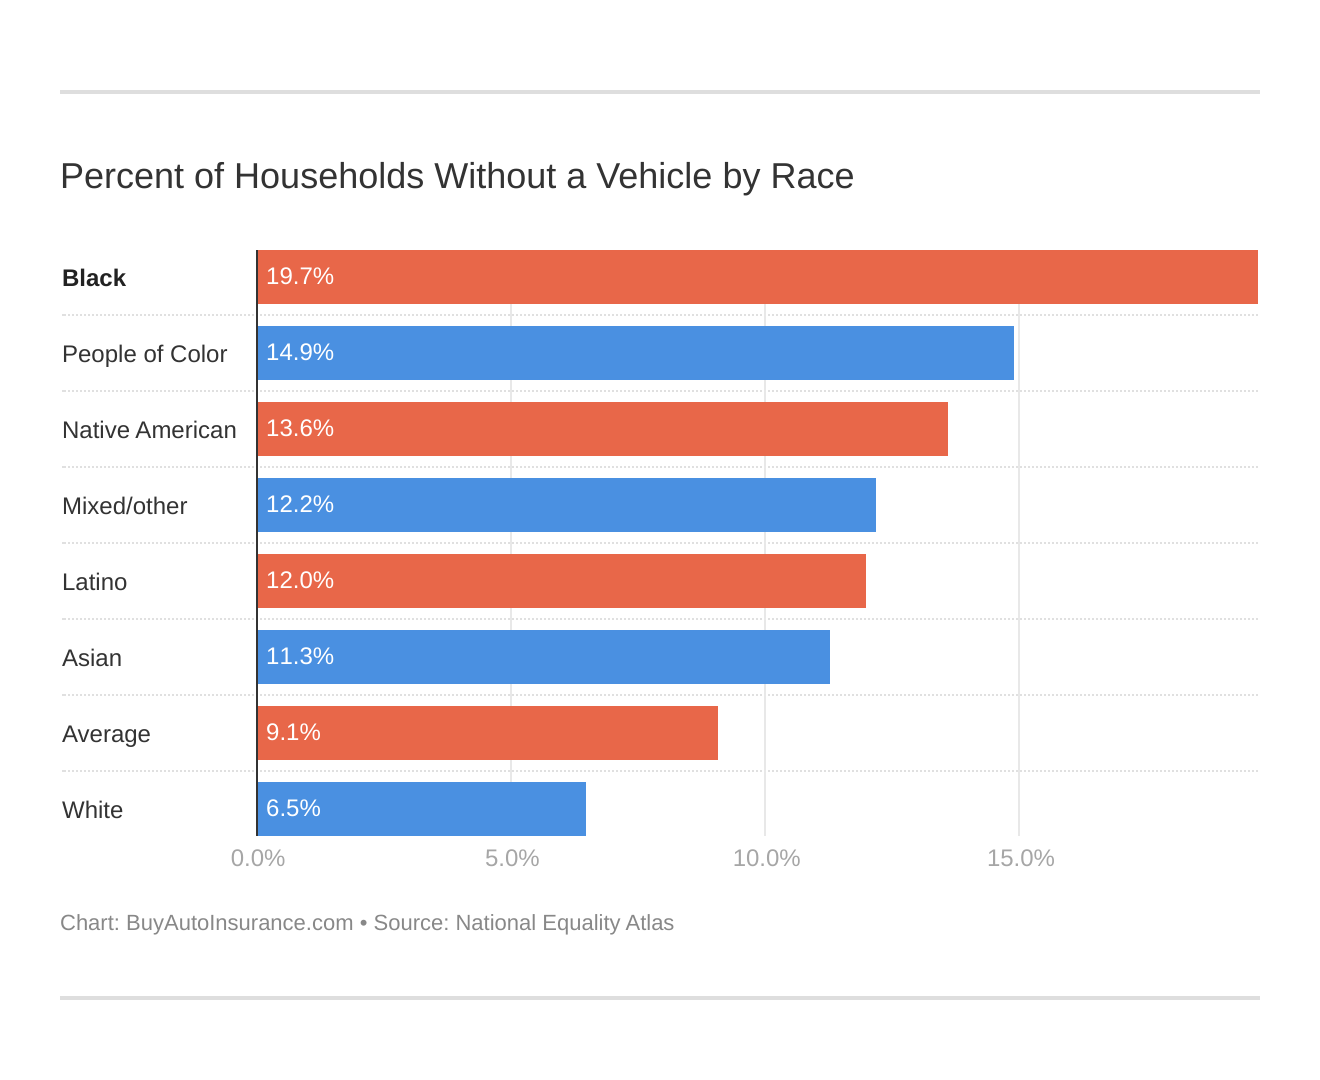 Percent of Households Without a Vehicle by Race